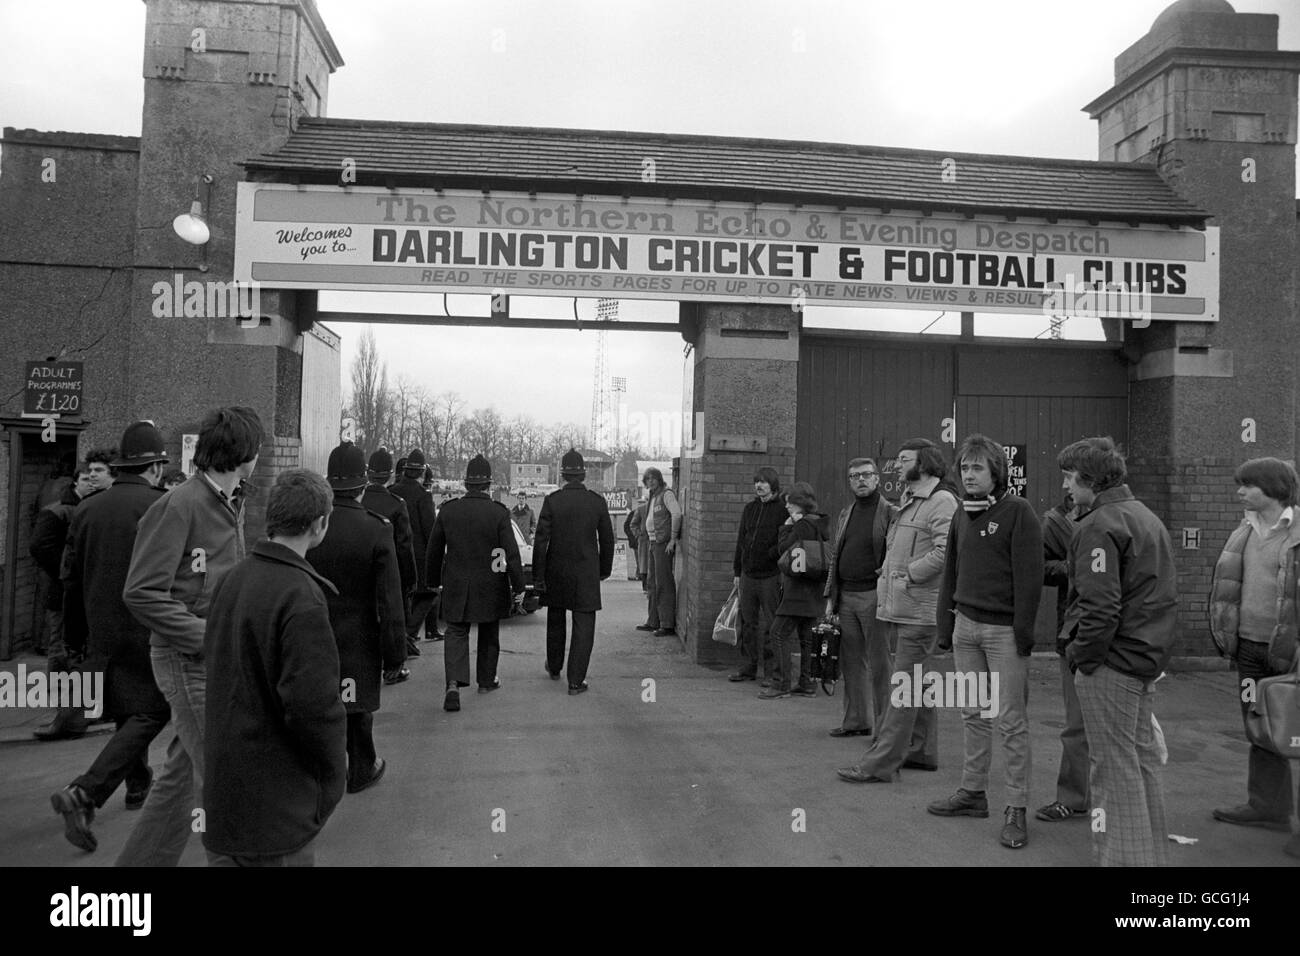 Soccer - League Division Four - Darlington v Mansfield Town - Feethams. Darlington fans arriving for the first Sunday football League game against Mansfield Town. Stock Photo